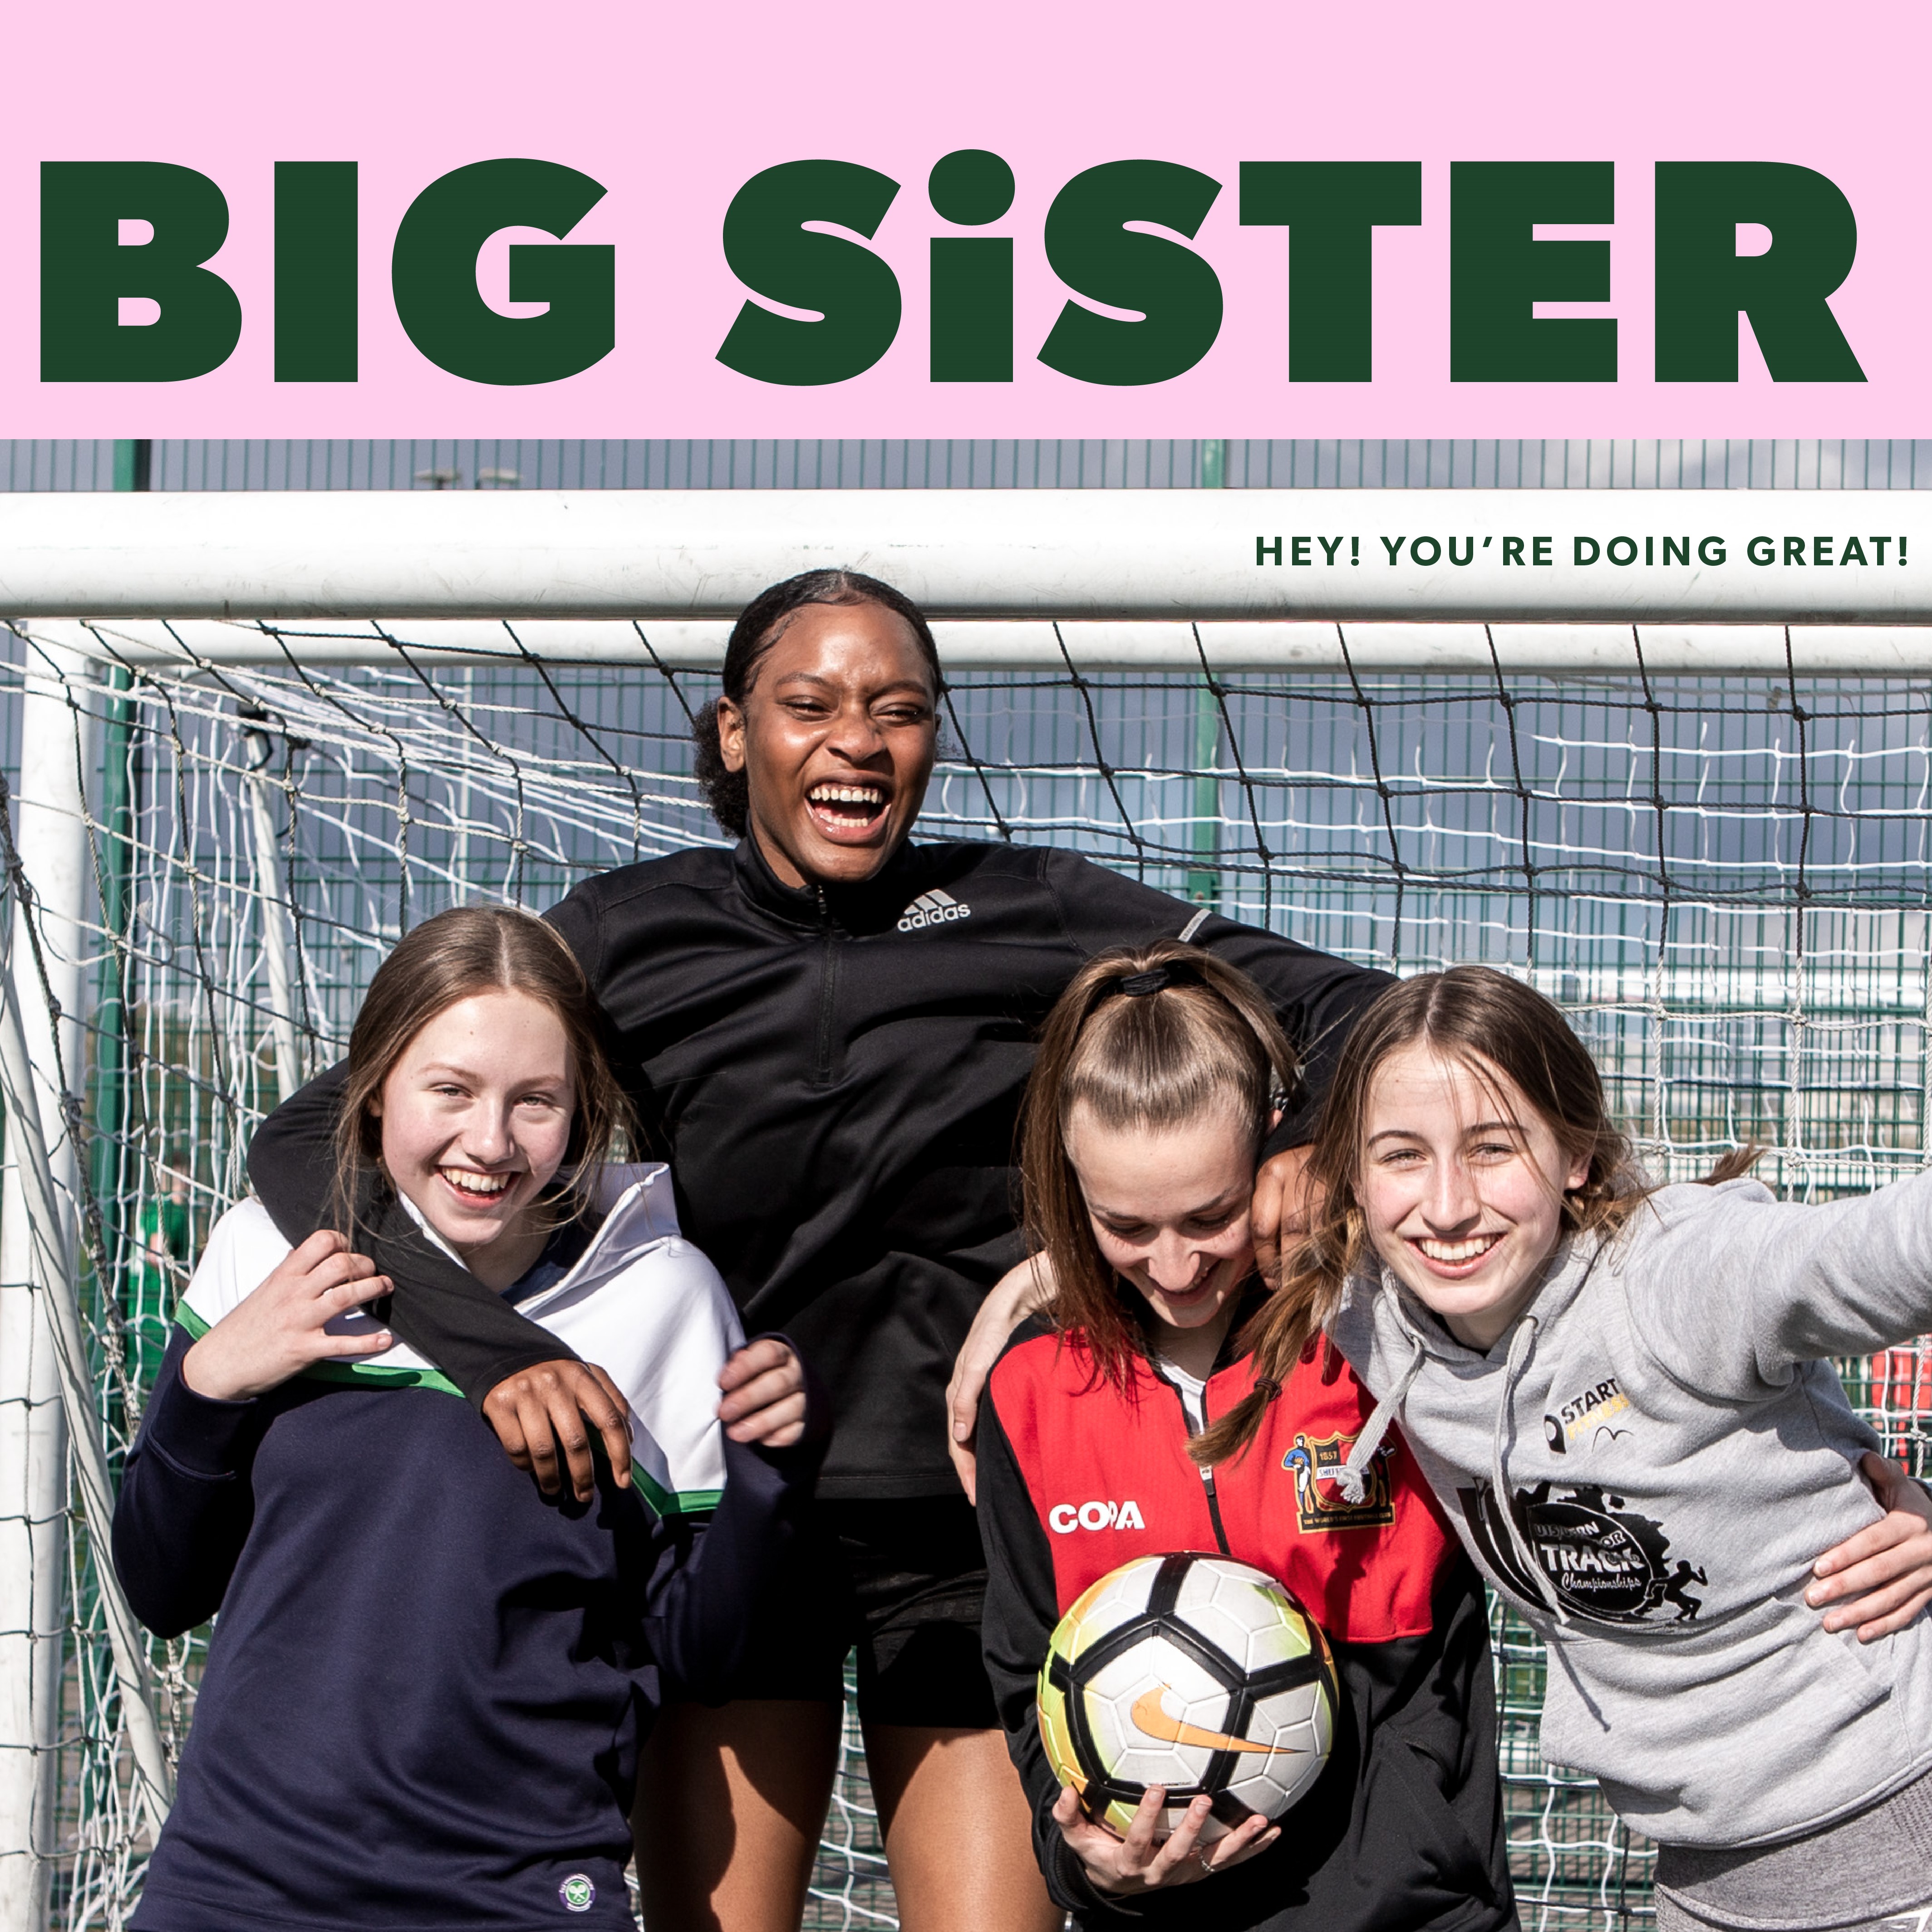 Activity Alliance: Big Sister Aims to Break Down the Barriers to